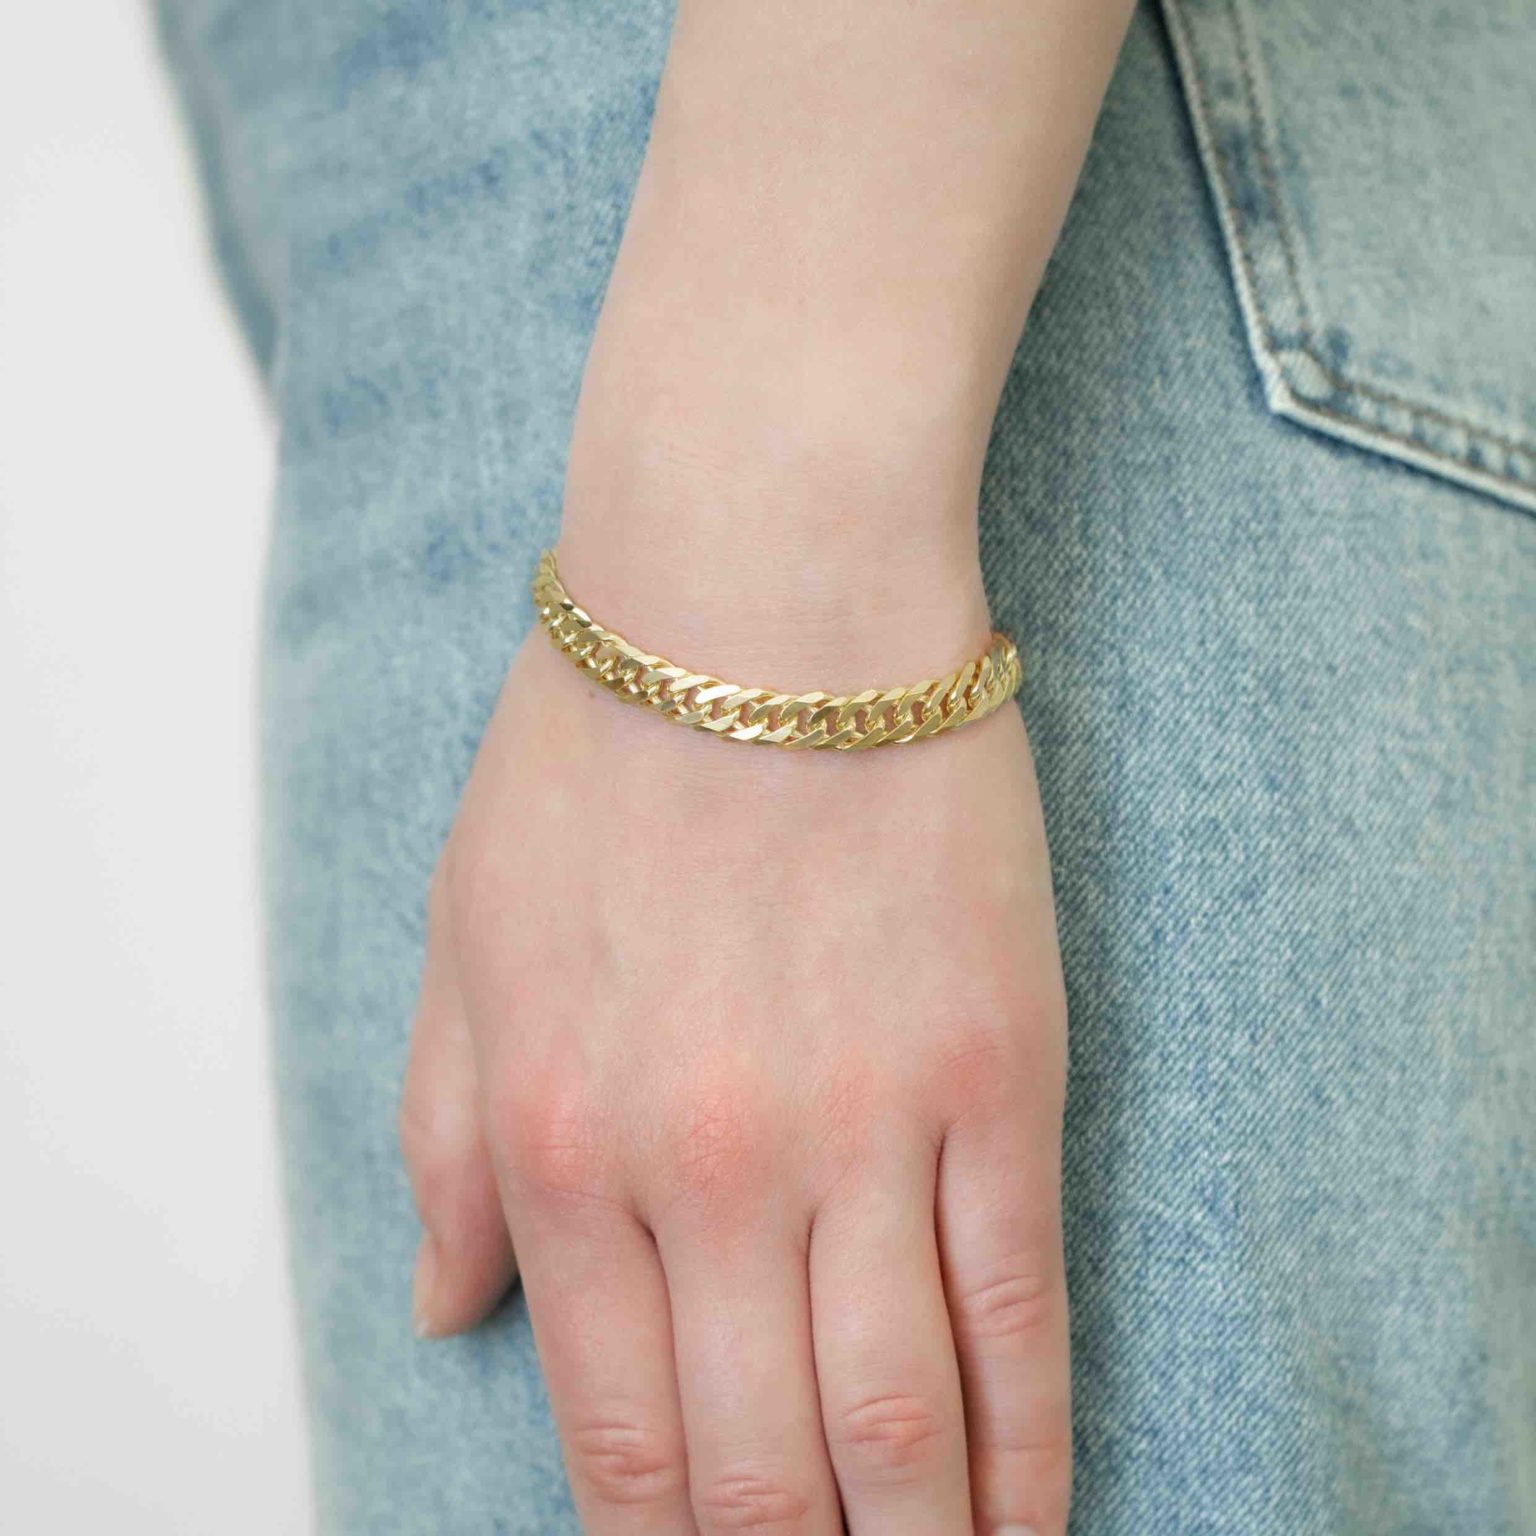 Double Link bracelet gold plated silver from Hasla Jewelry in 18 cm. A chunky bracelet in solid silver